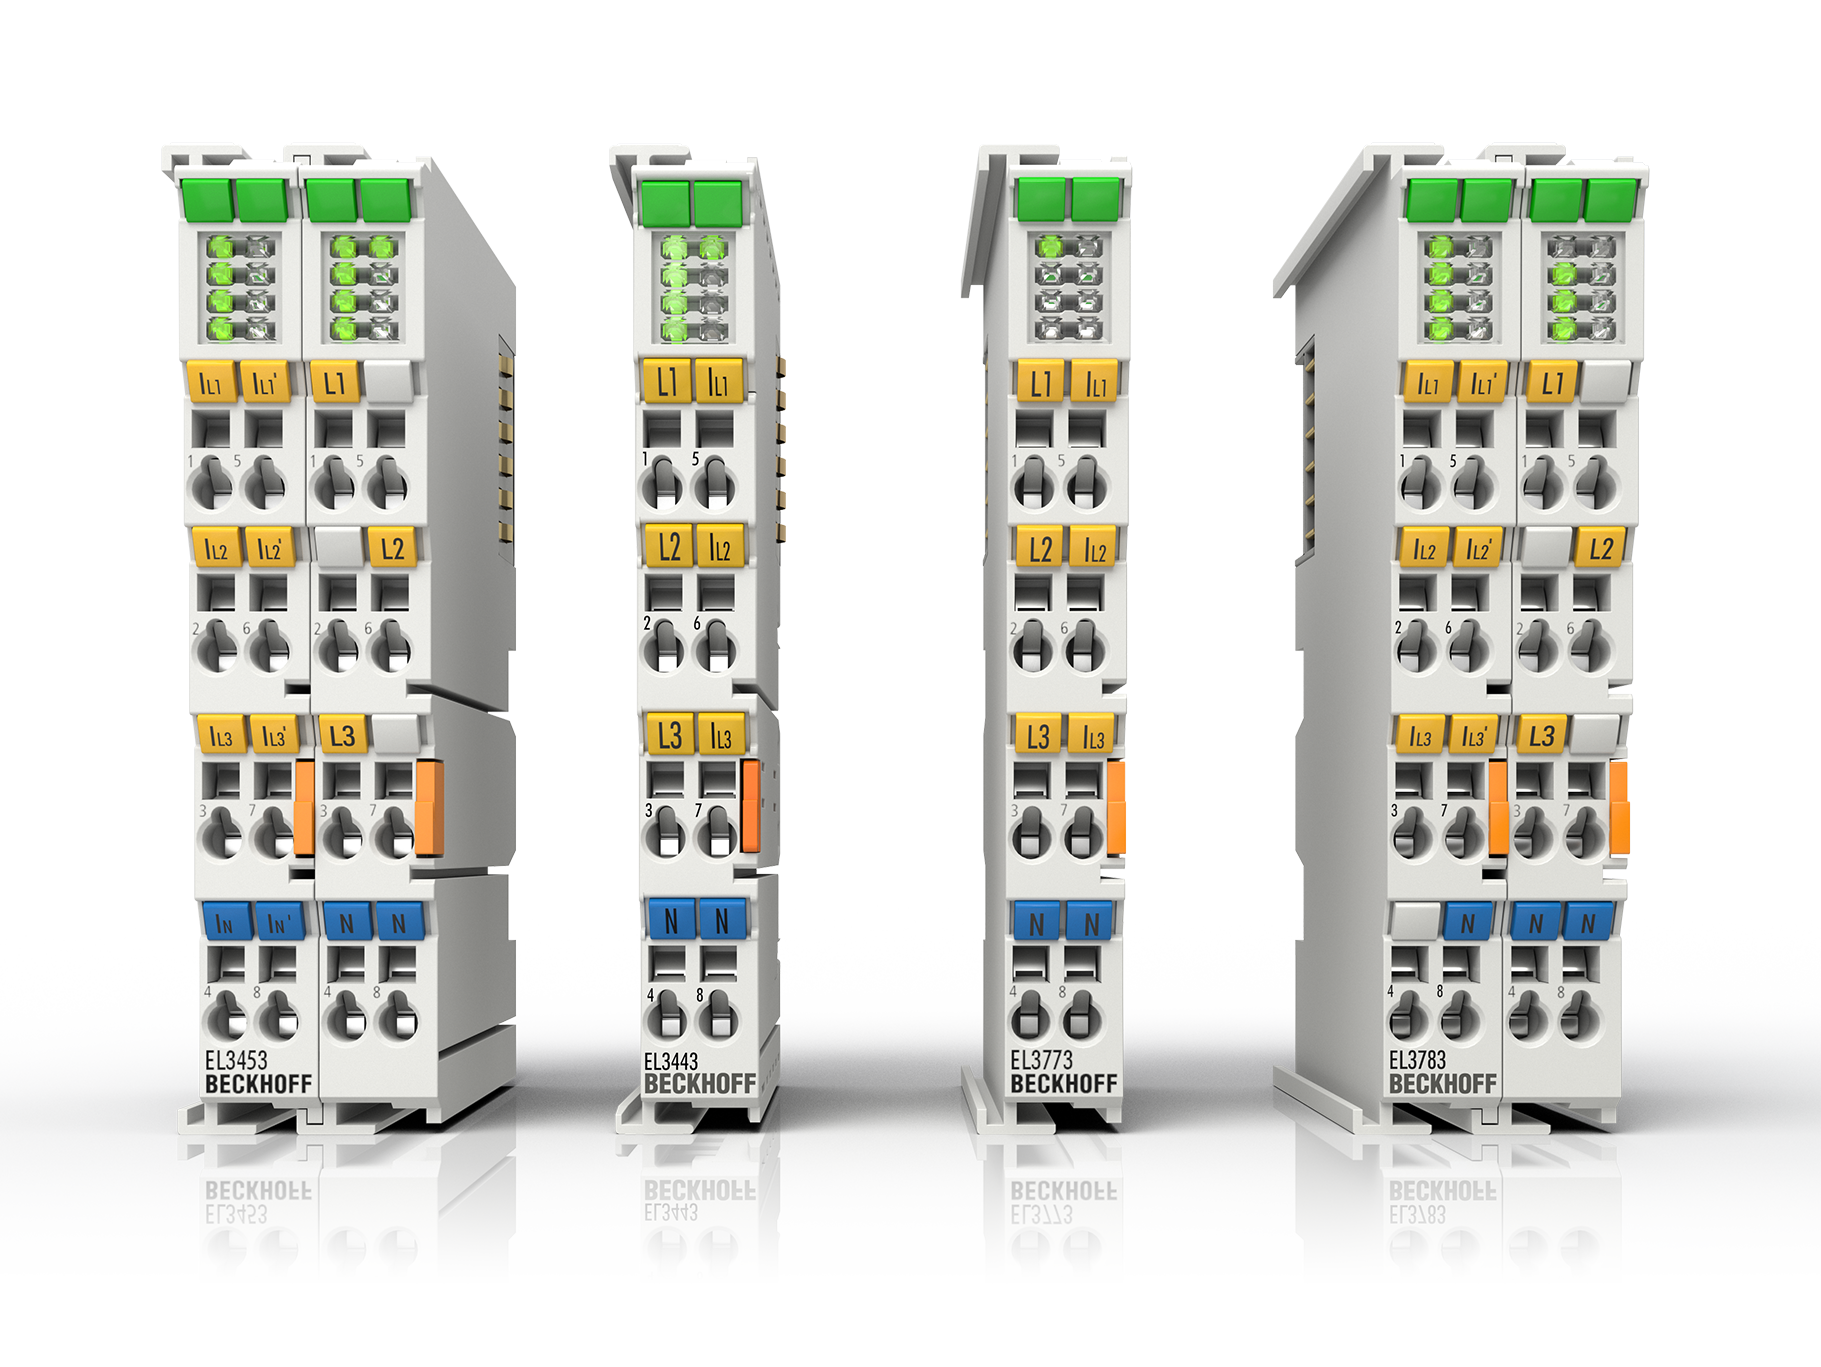 The EL3773 and EL3783 EtherCAT Terminals are designed to be used as power monitoring terminals for the detection of the state of a 3-phase AC voltage system. 